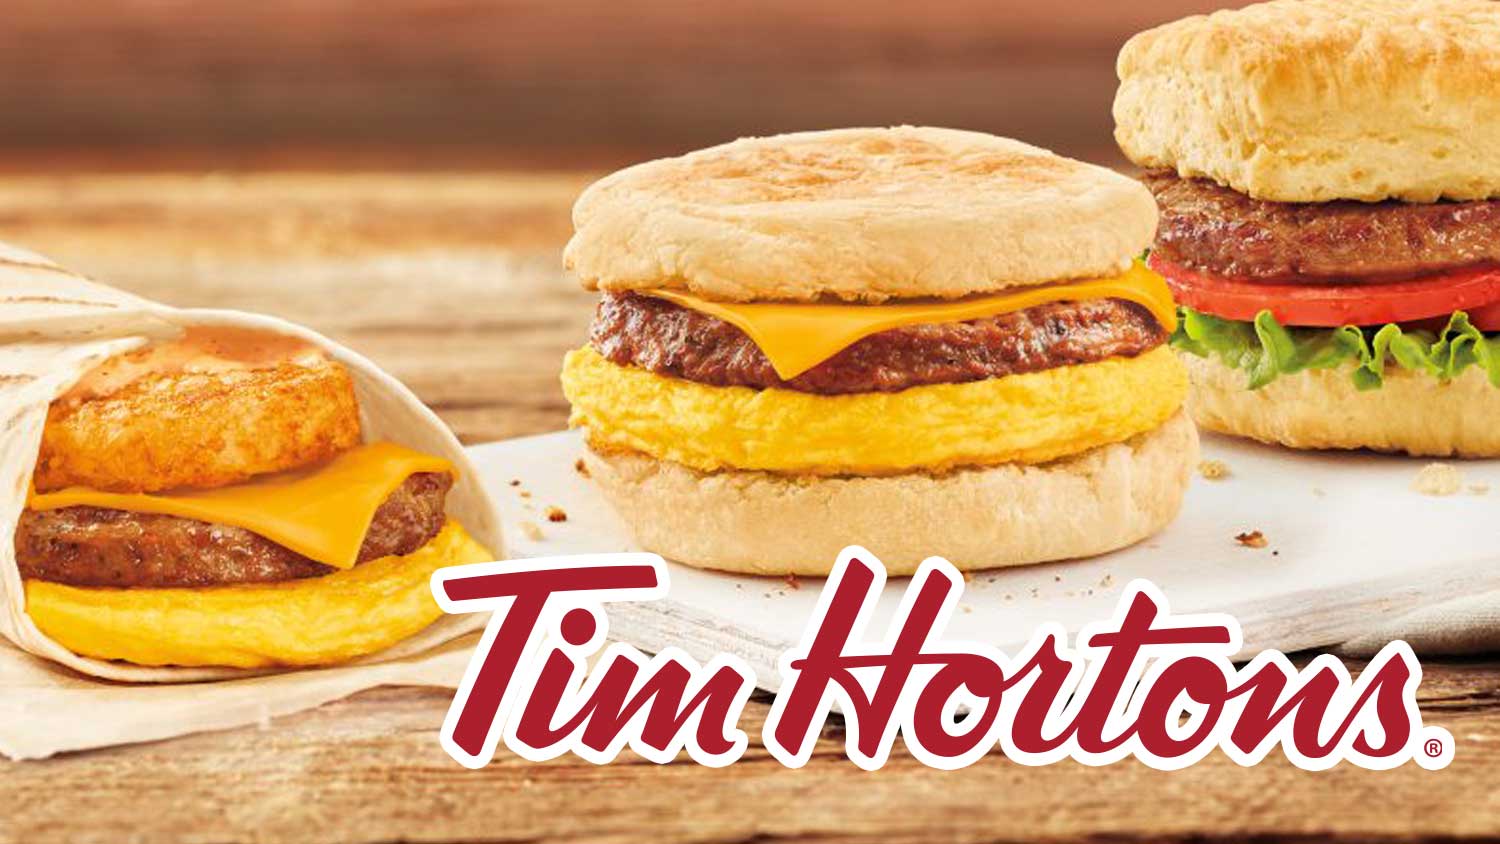 Tim Hortons is now testing out plant-based eggs